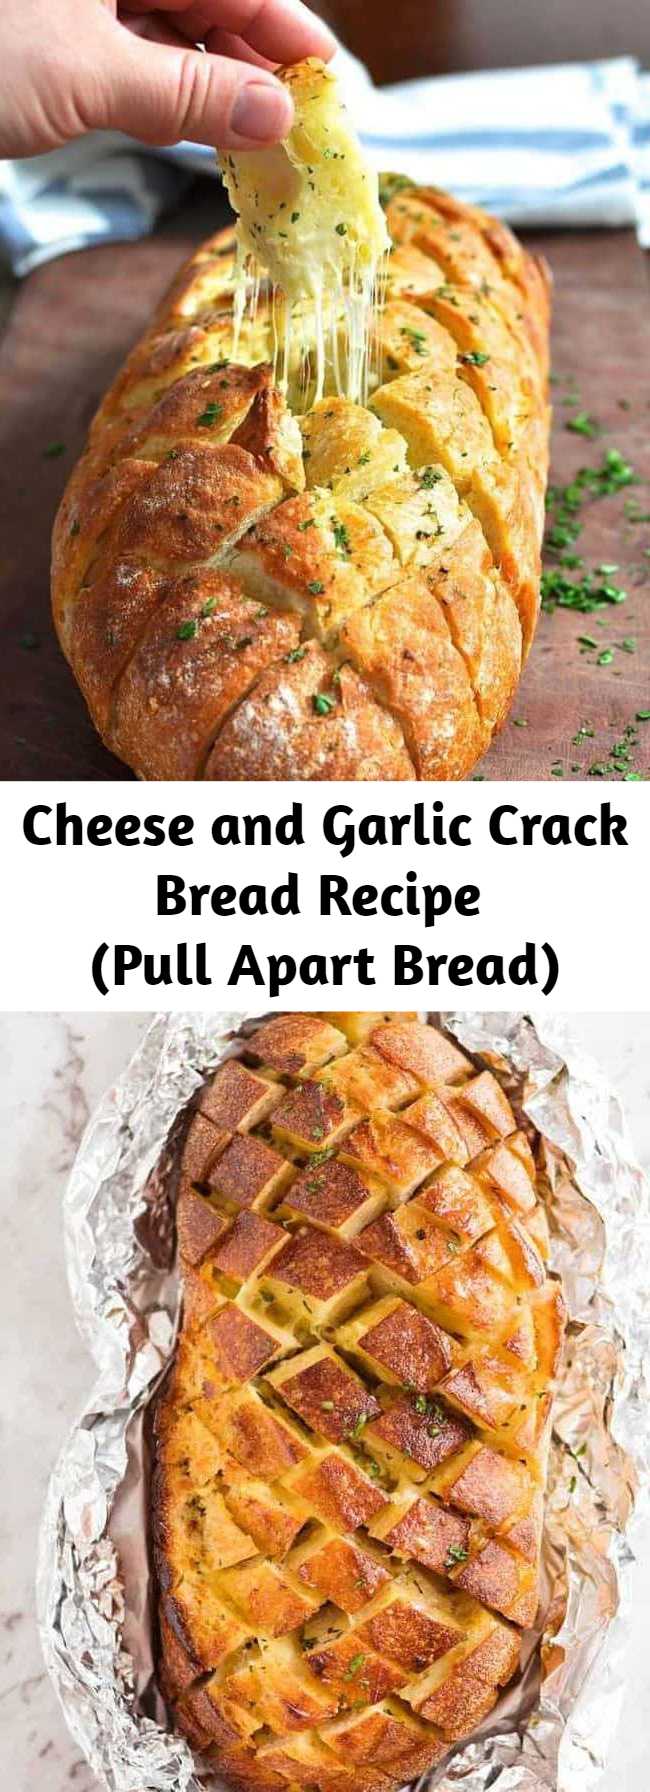 Cheese and Garlic Crack Bread Recipe (Pull Apart Bread) - This is garlic bread - on crack! Great to share with a crowd, or as a centre piece for dinner accompanied by a simple salad.